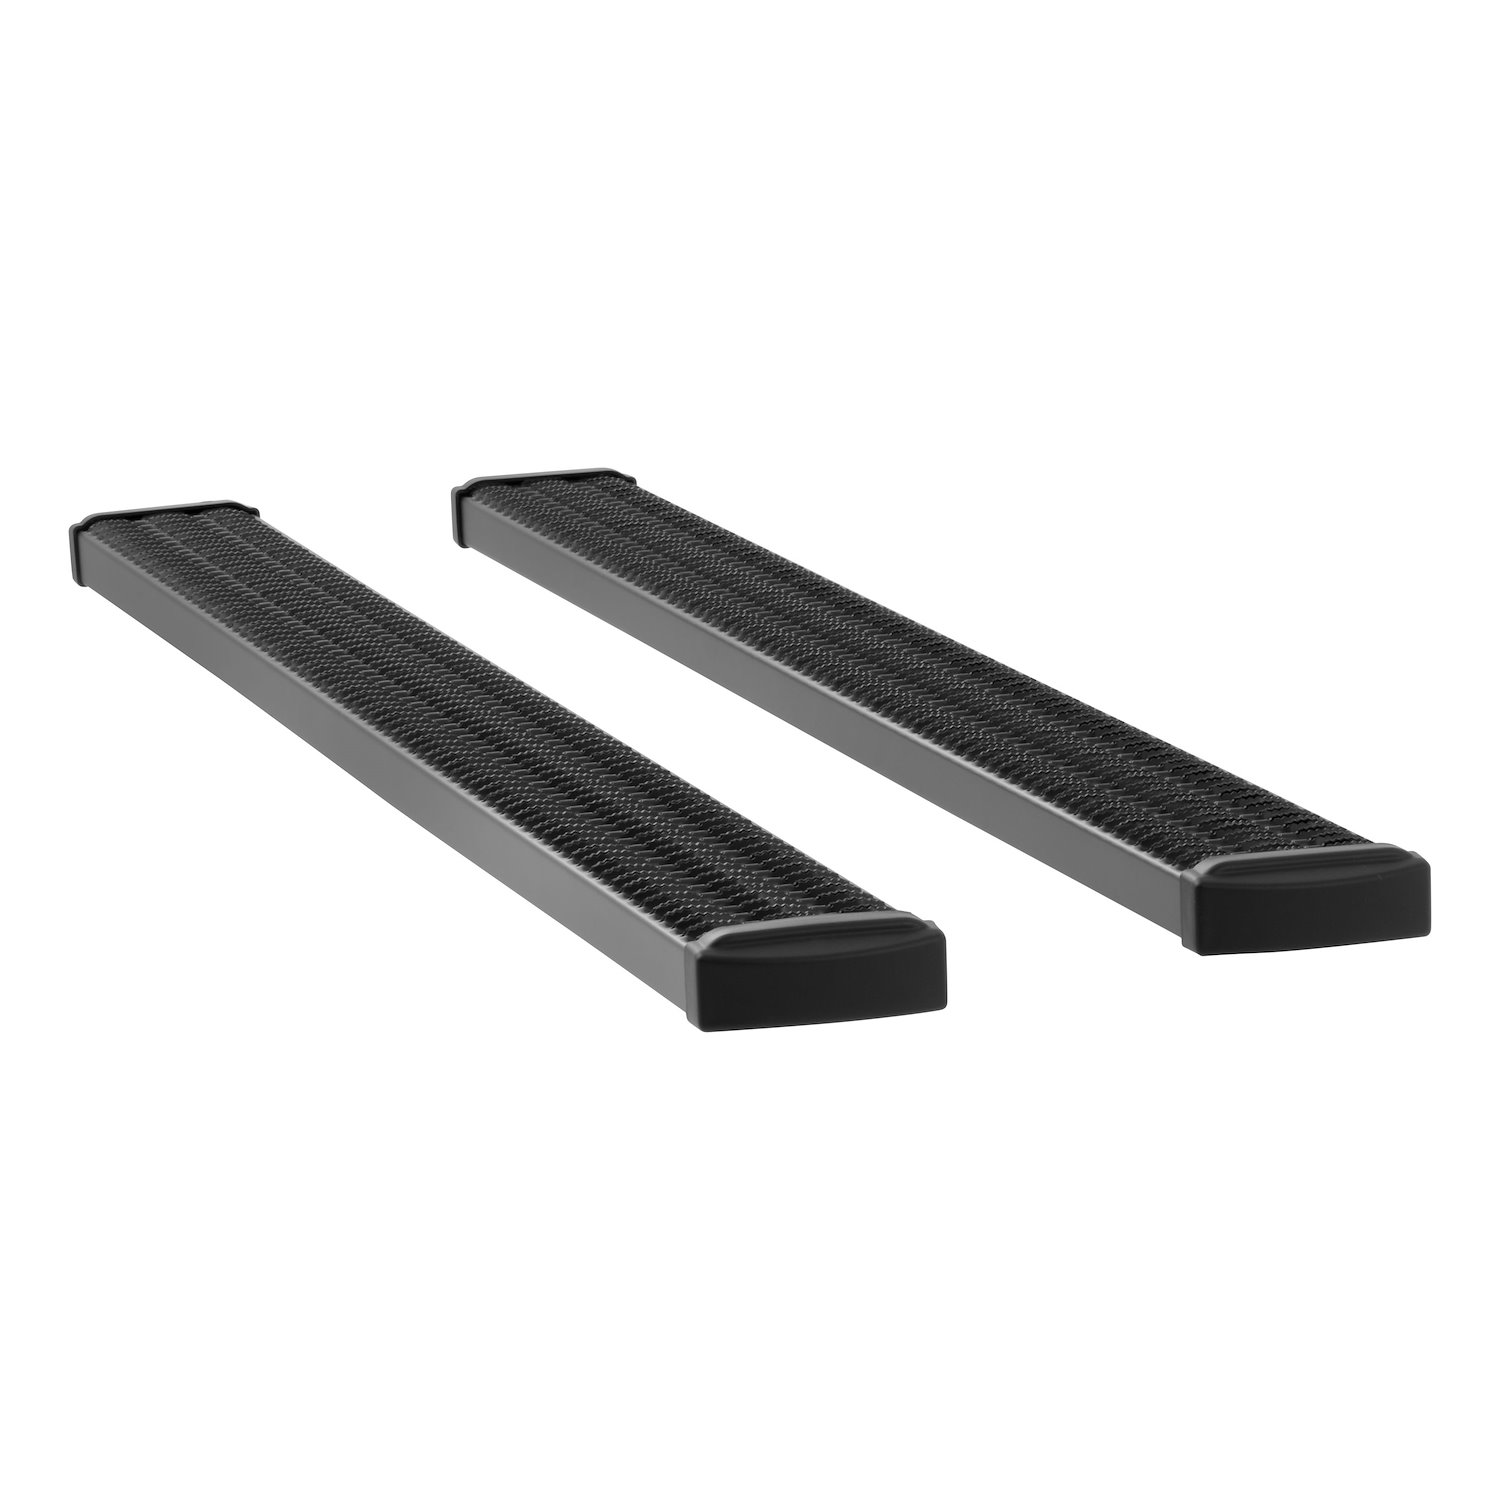 415088-400713 Grip Step 7 in. x 88 in. Black Aluminum Running Boards Fits Select Chevrolet, GMC